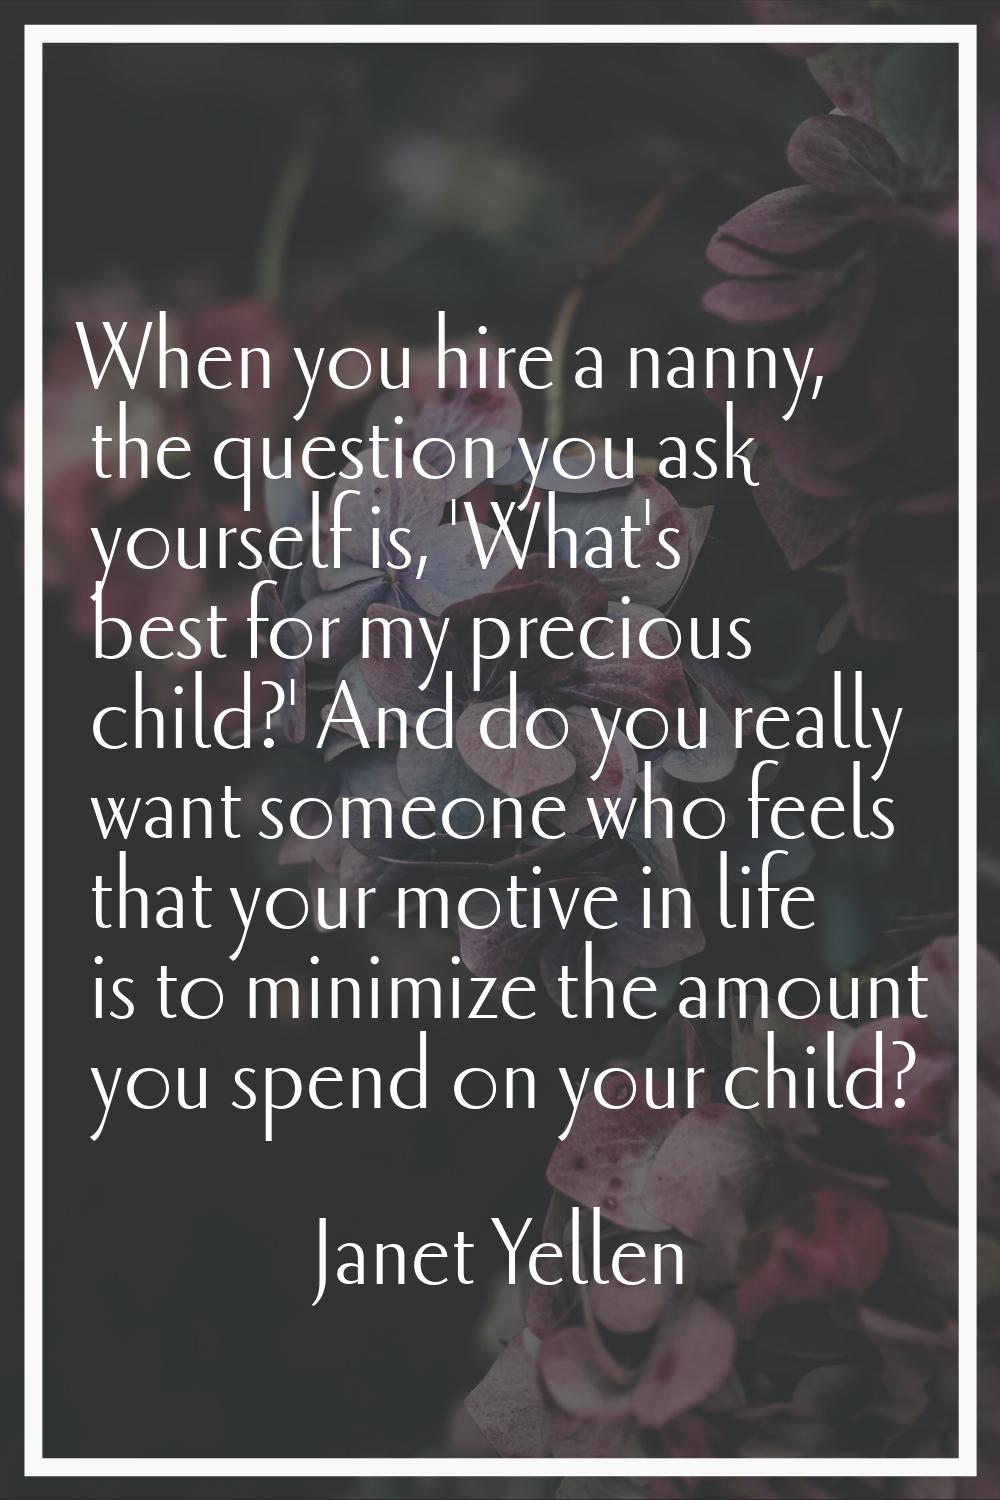 When you hire a nanny, the question you ask yourself is, 'What's best for my precious child?' And d